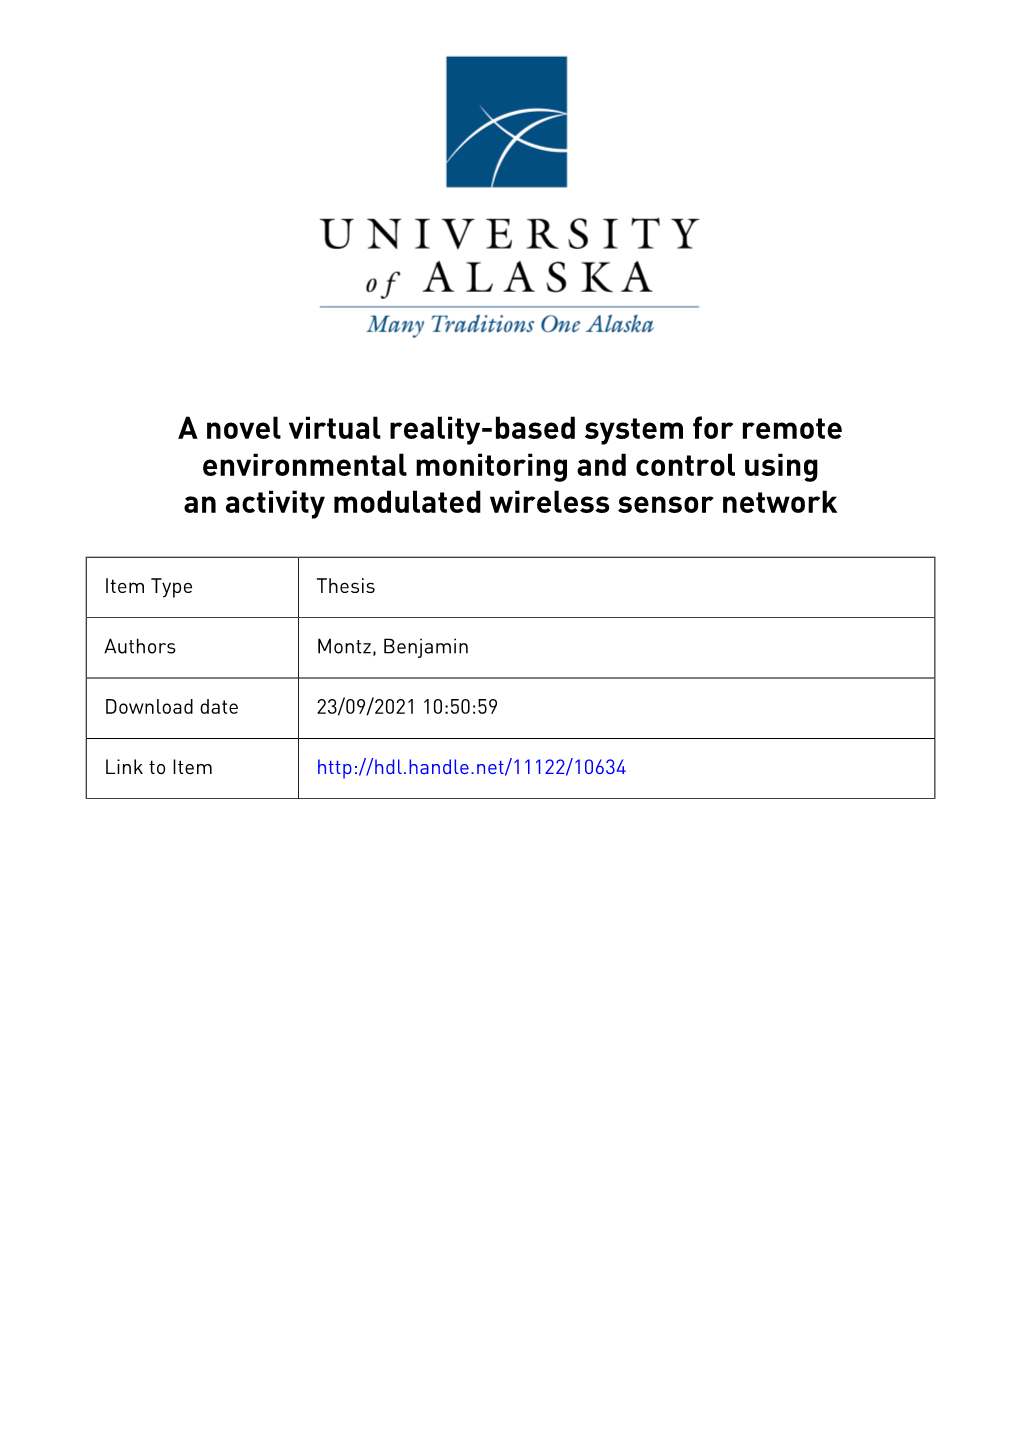 A Novel Virtual Reality-Based System for Remote Environmental Monitoring and Control Using an Activity Modulated Wireless Sensor Network